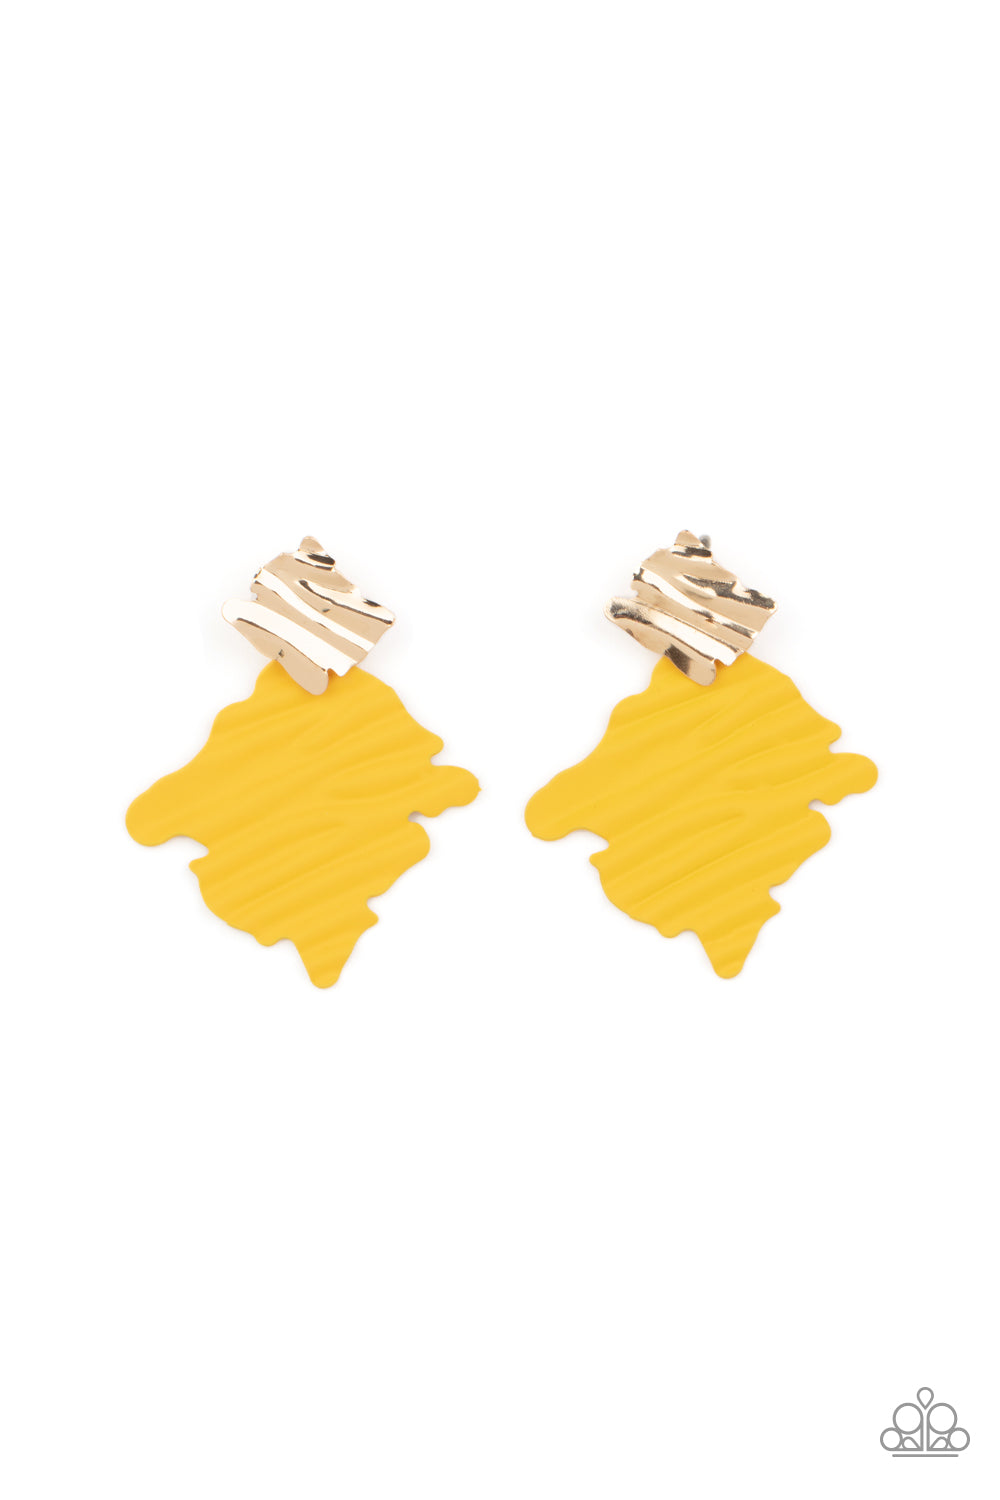 Crimped Couture - Yellow Frame Earrings - Paparazzi Accessories painted in a rustic finish, a rippling Mustard frame links to a dainty gold frame featuring crimped texture, resulting in a modern lure. Earring attaches to a standard post fitting.